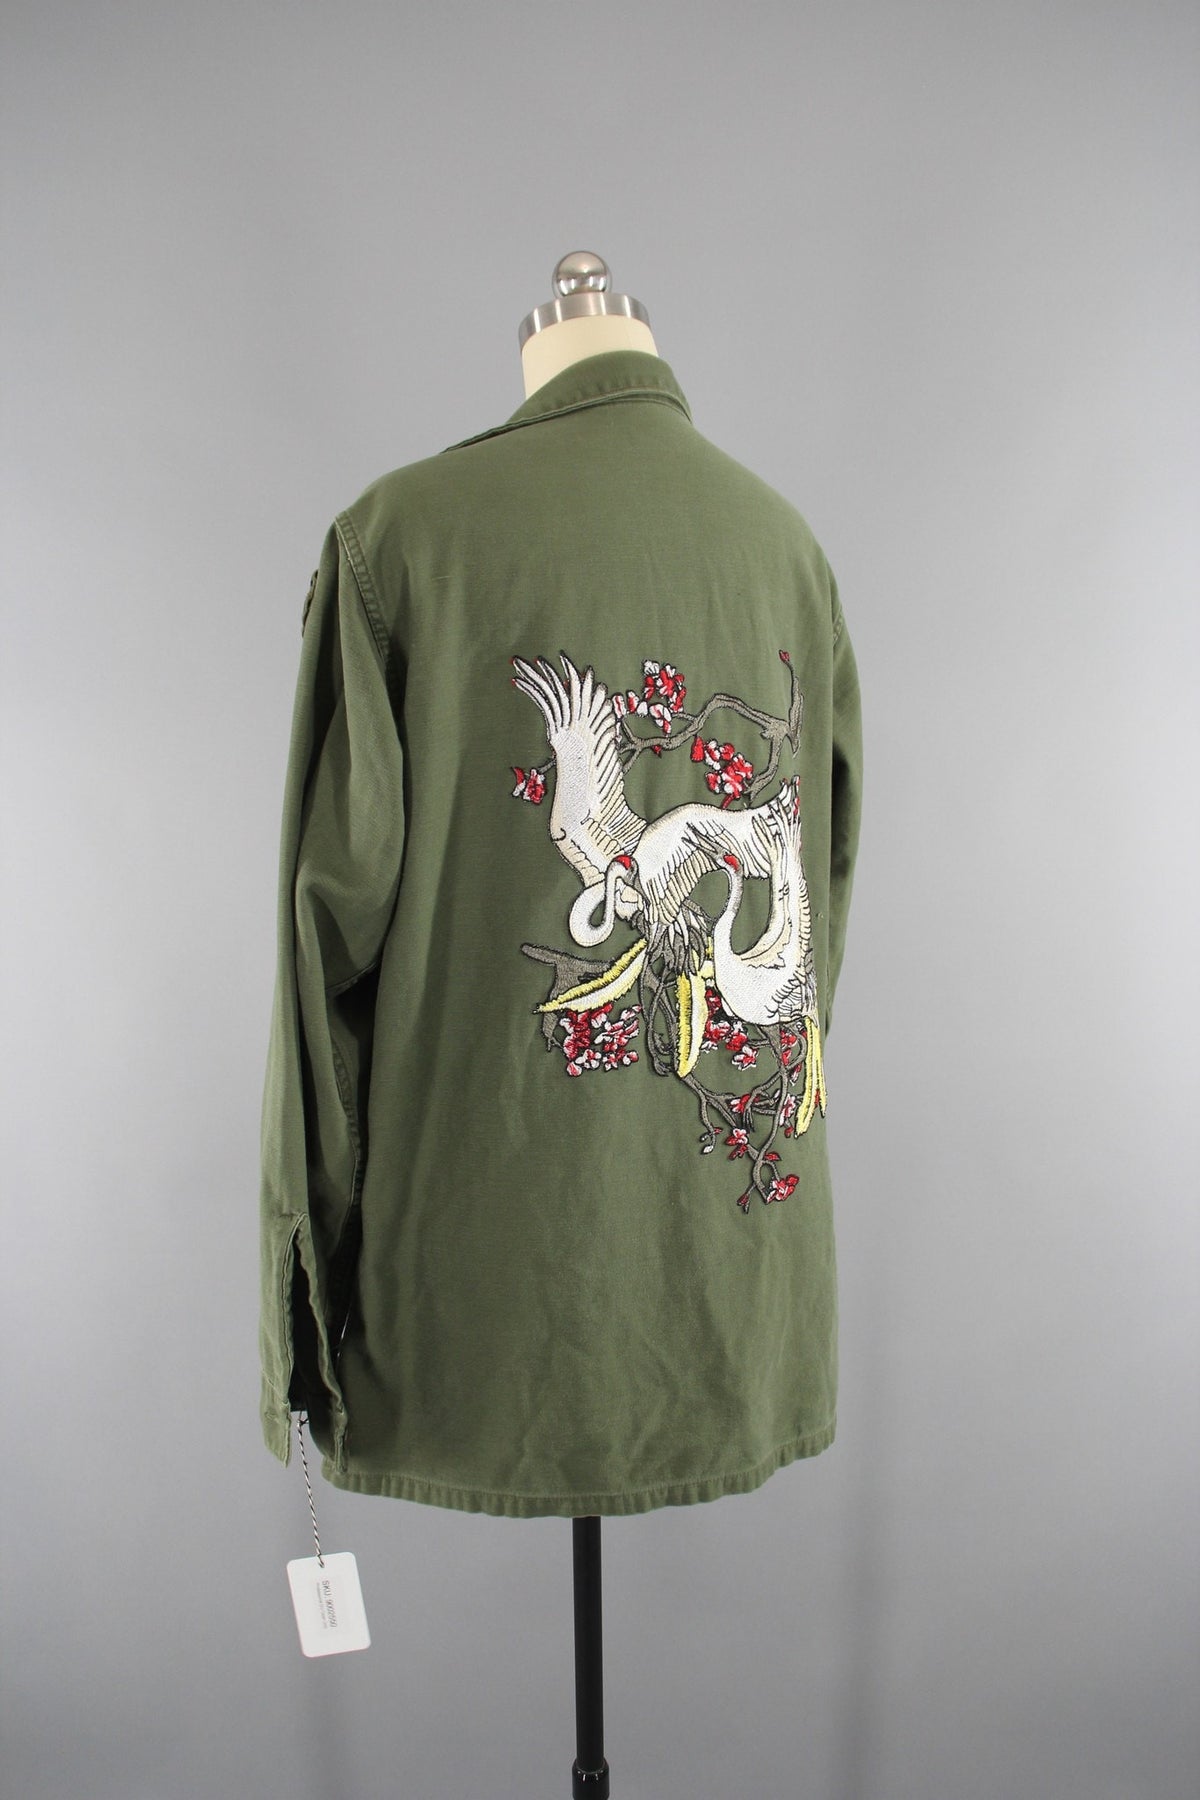 1960s Vintage Embroidered US Army Jacket with Flying Crane Birds Embro ...